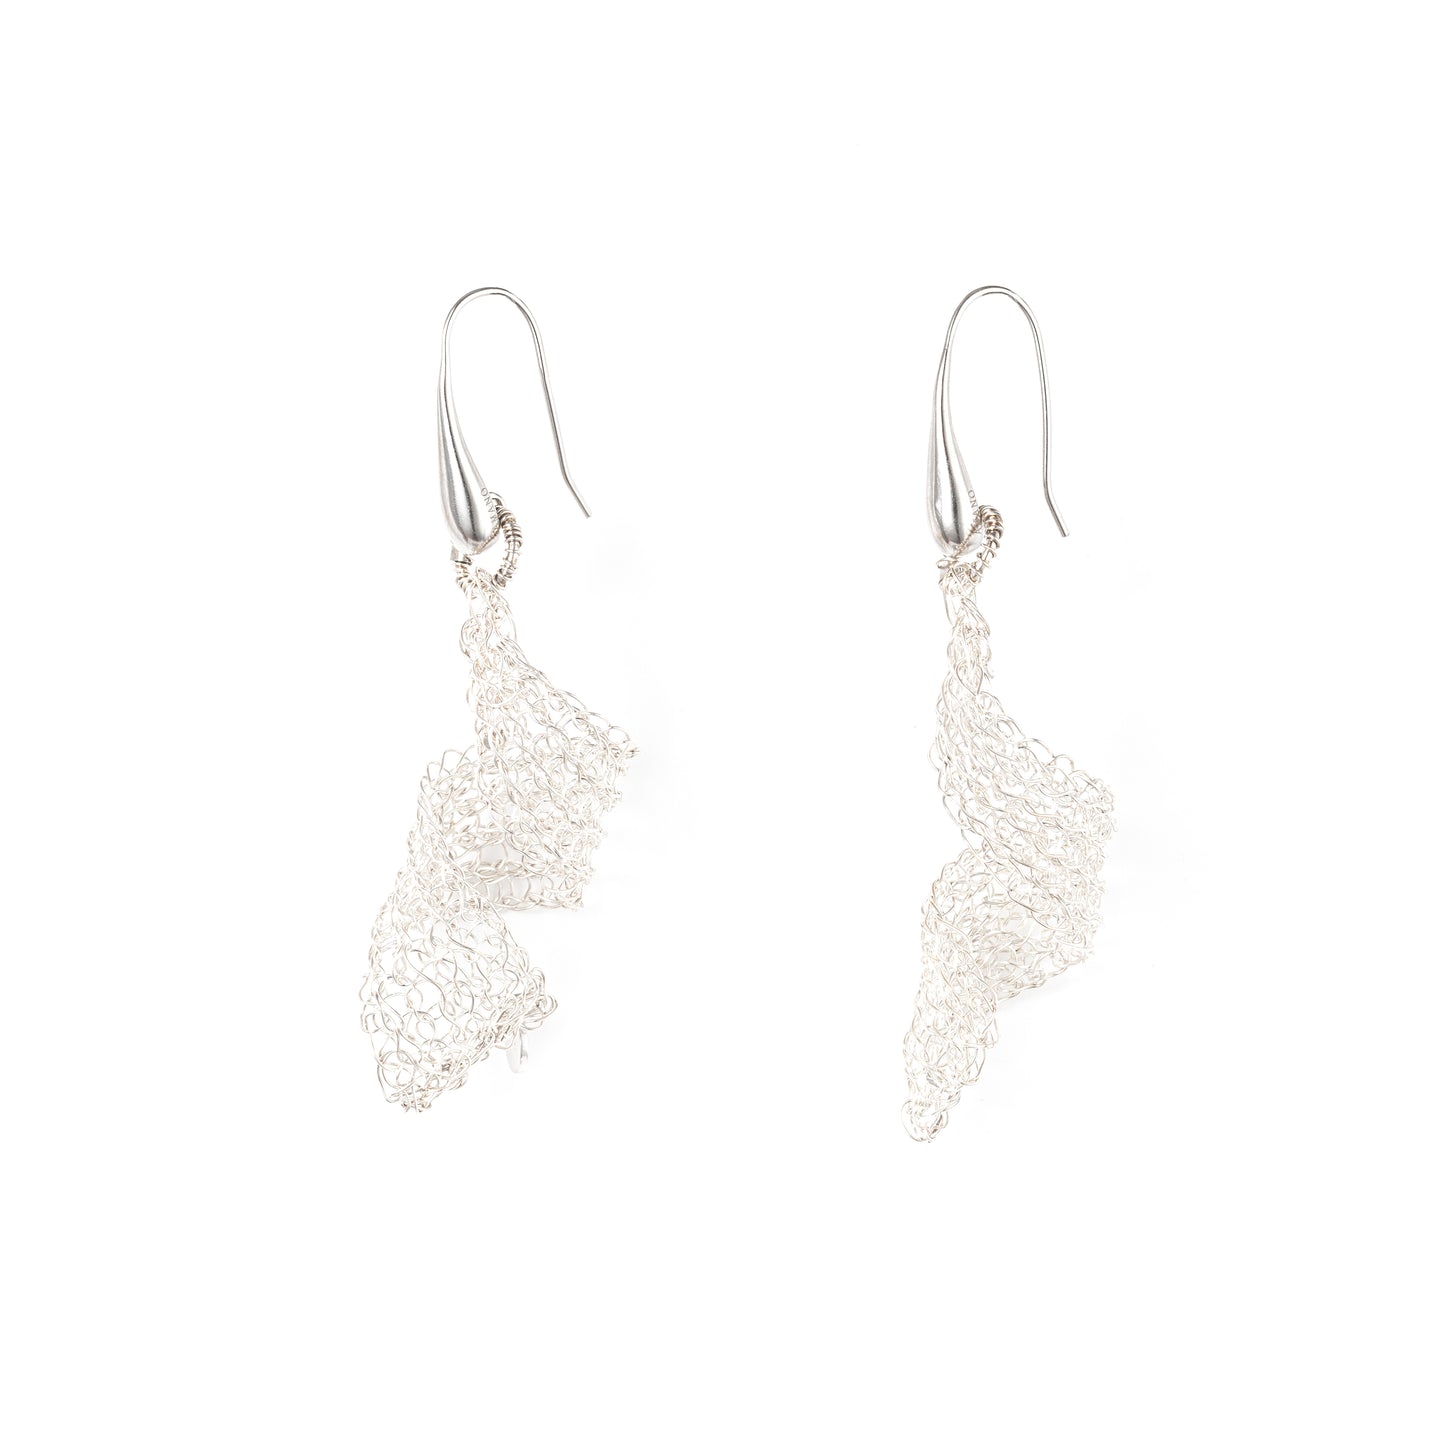 Chasing Light Series - Silver Wave Earrings